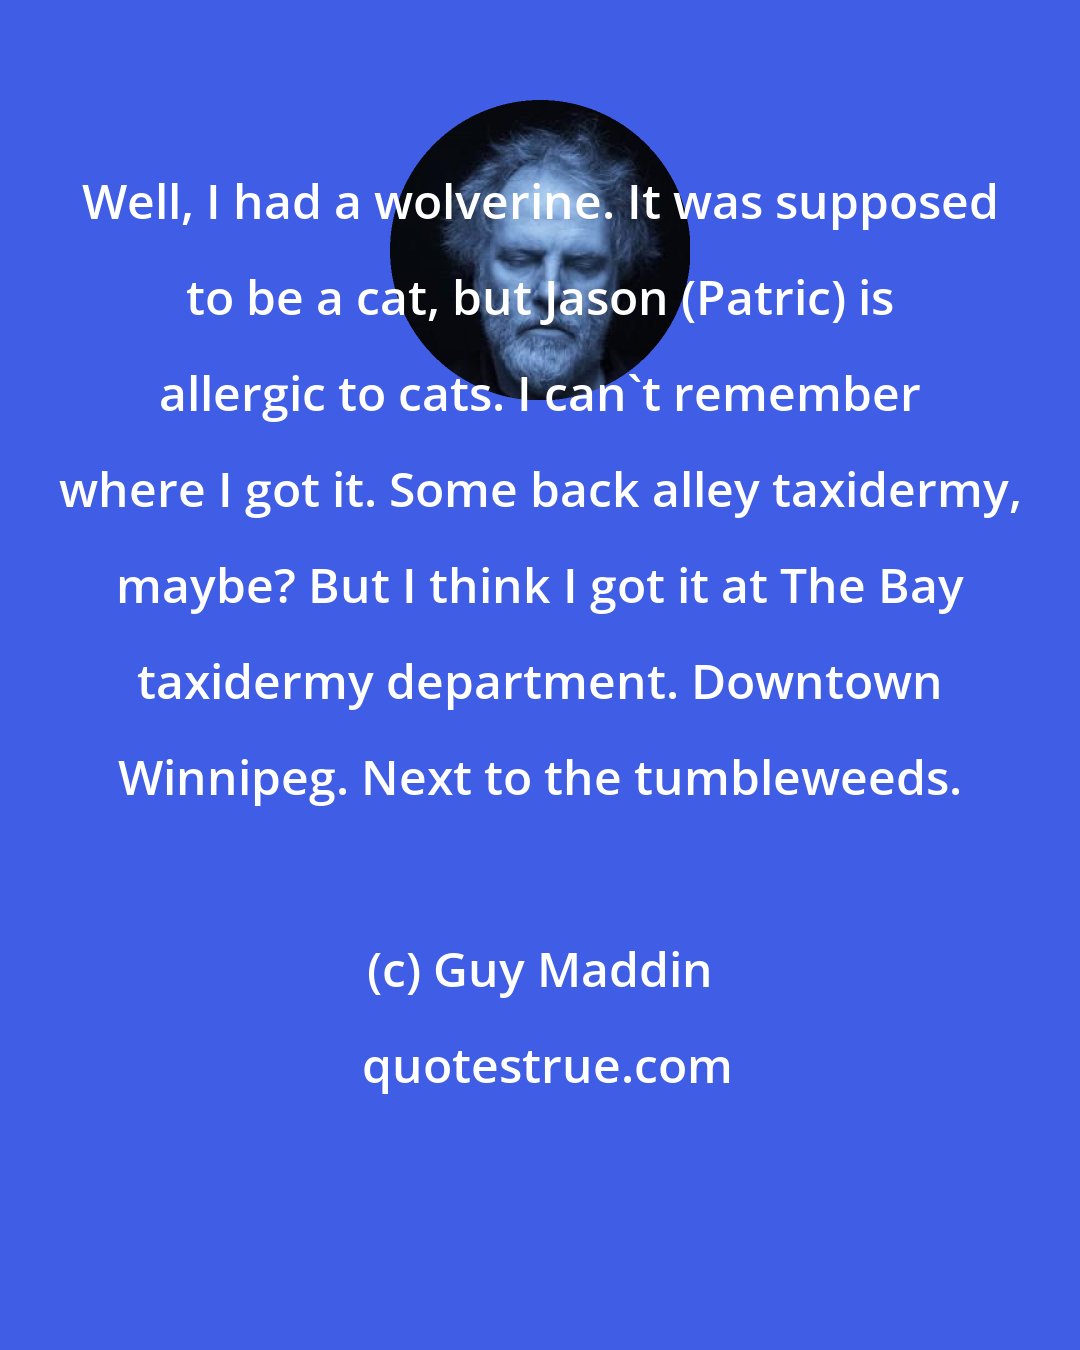 Guy Maddin: Well, I had a wolverine. It was supposed to be a cat, but Jason (Patric) is allergic to cats. I can't remember where I got it. Some back alley taxidermy, maybe? But I think I got it at The Bay taxidermy department. Downtown Winnipeg. Next to the tumbleweeds.